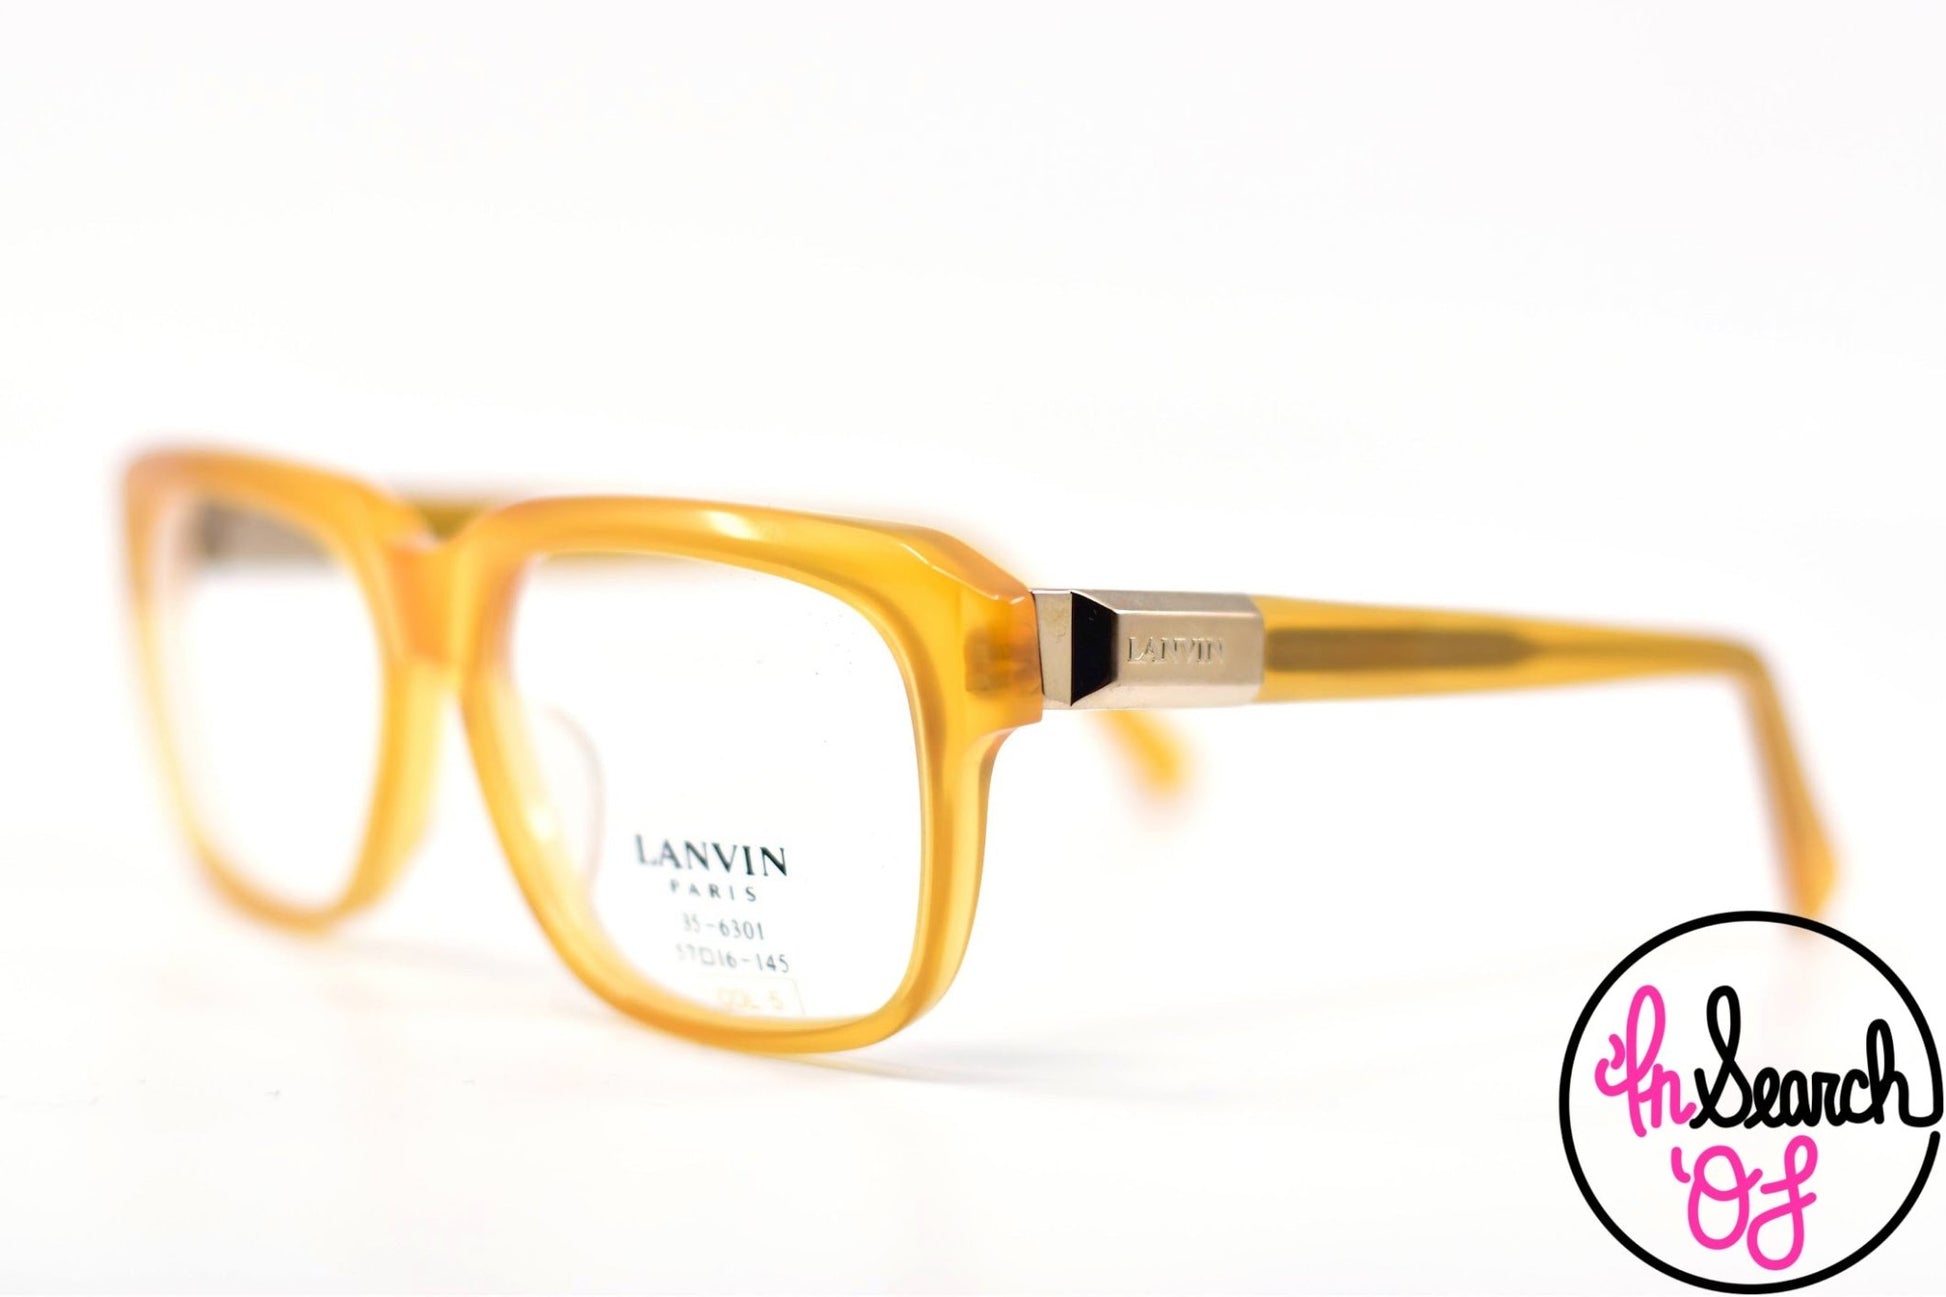 Lanvin 35-6301 - In Search Of